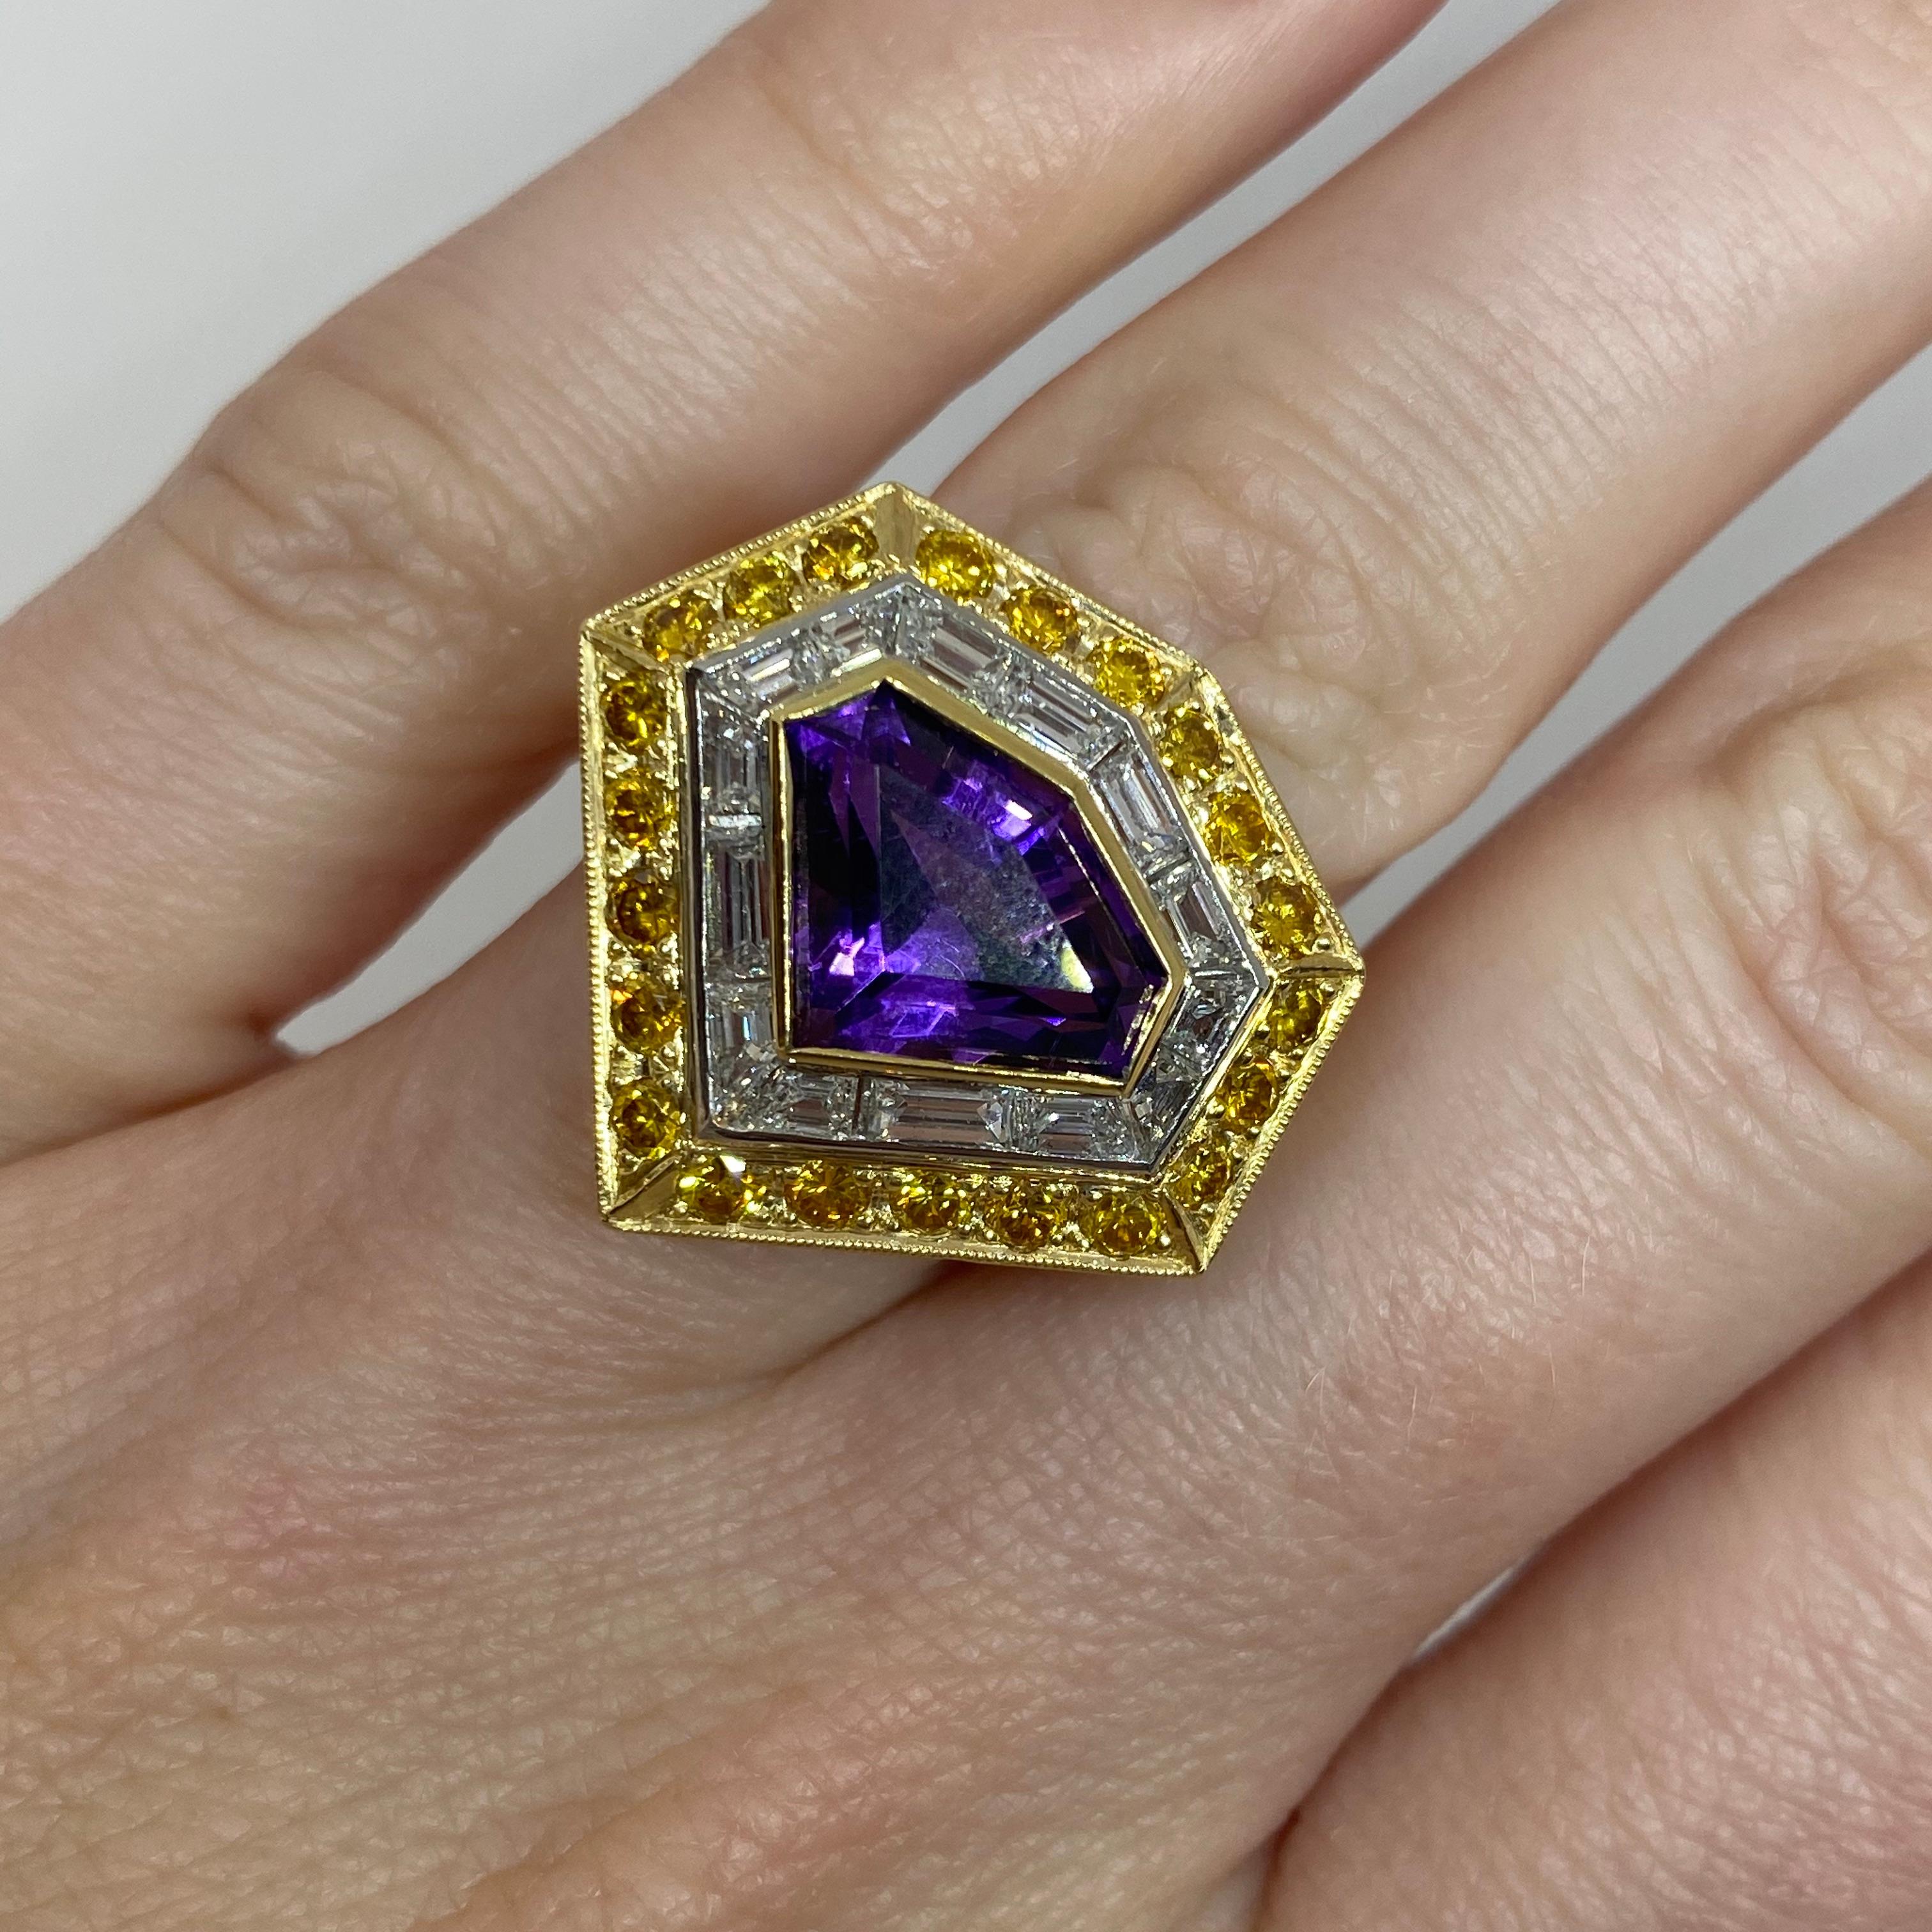 Handmade Mark Areias Jewelers Shield Shaped Kite Amethyst and Diamond Ring In New Condition For Sale In Carmel-by-the-Sea, CA